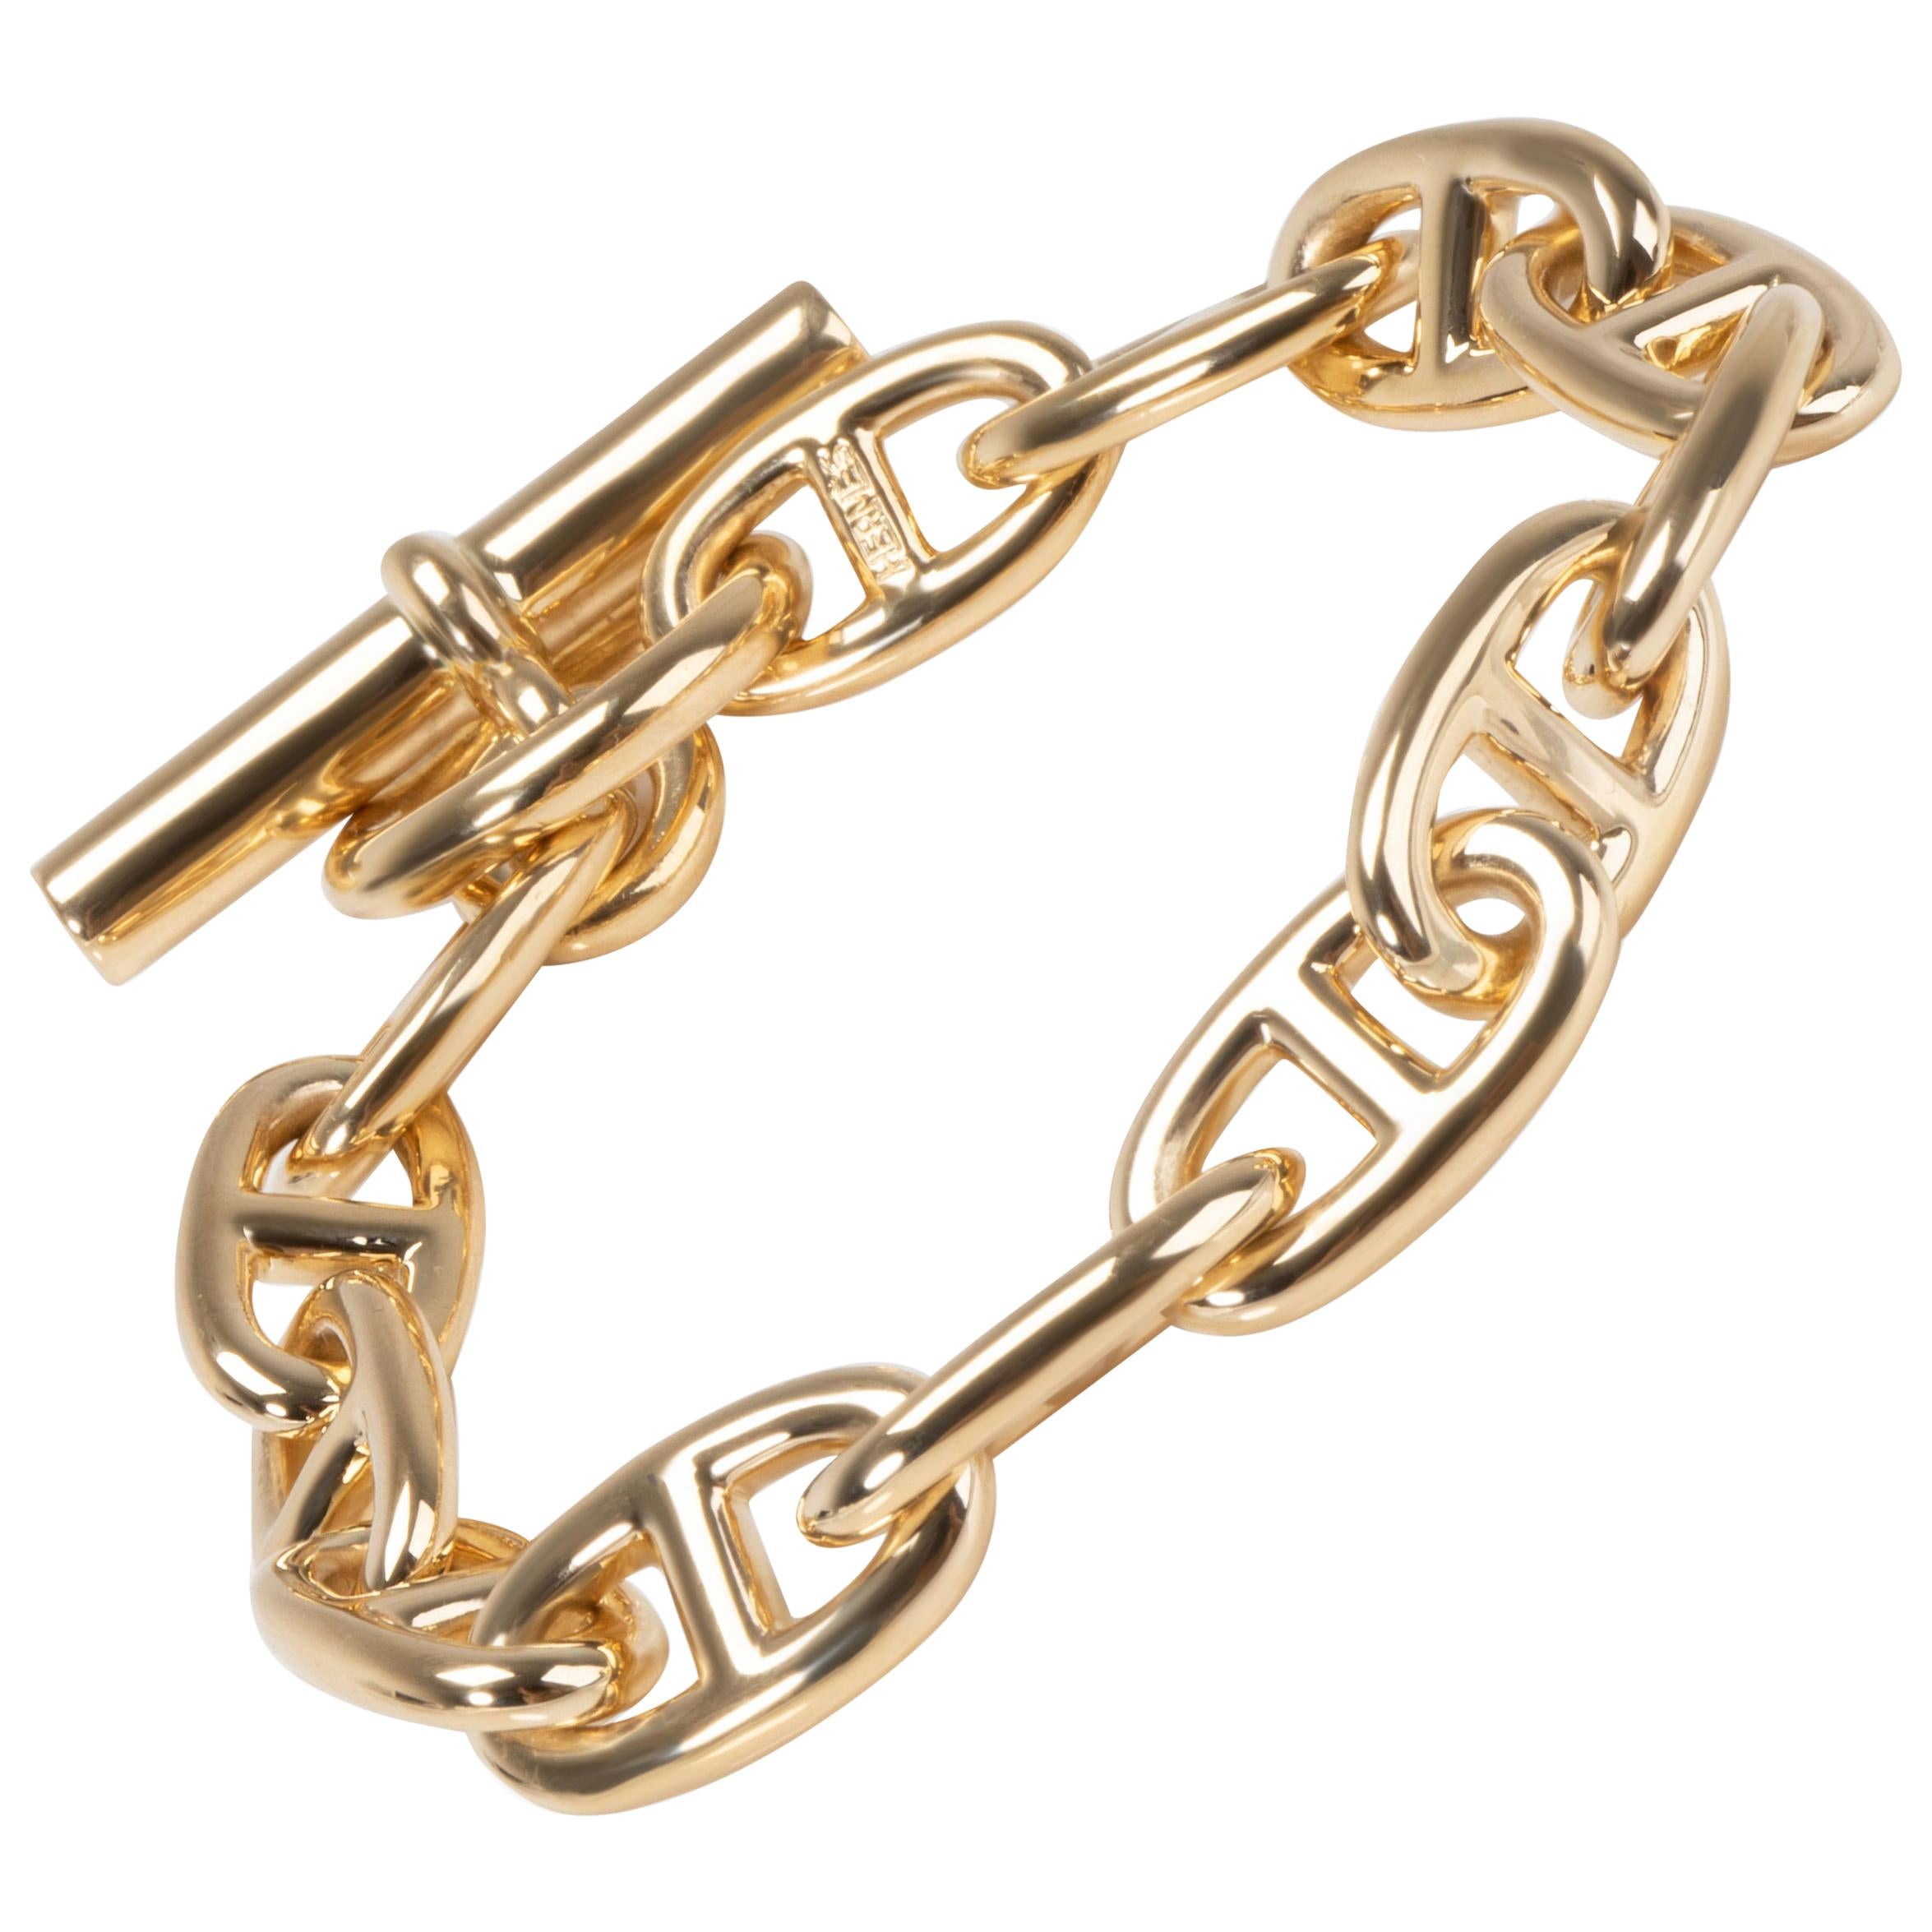 Hermès Chaine D'ancre Toggle Bracelet in 18 Karat Yellow Gold